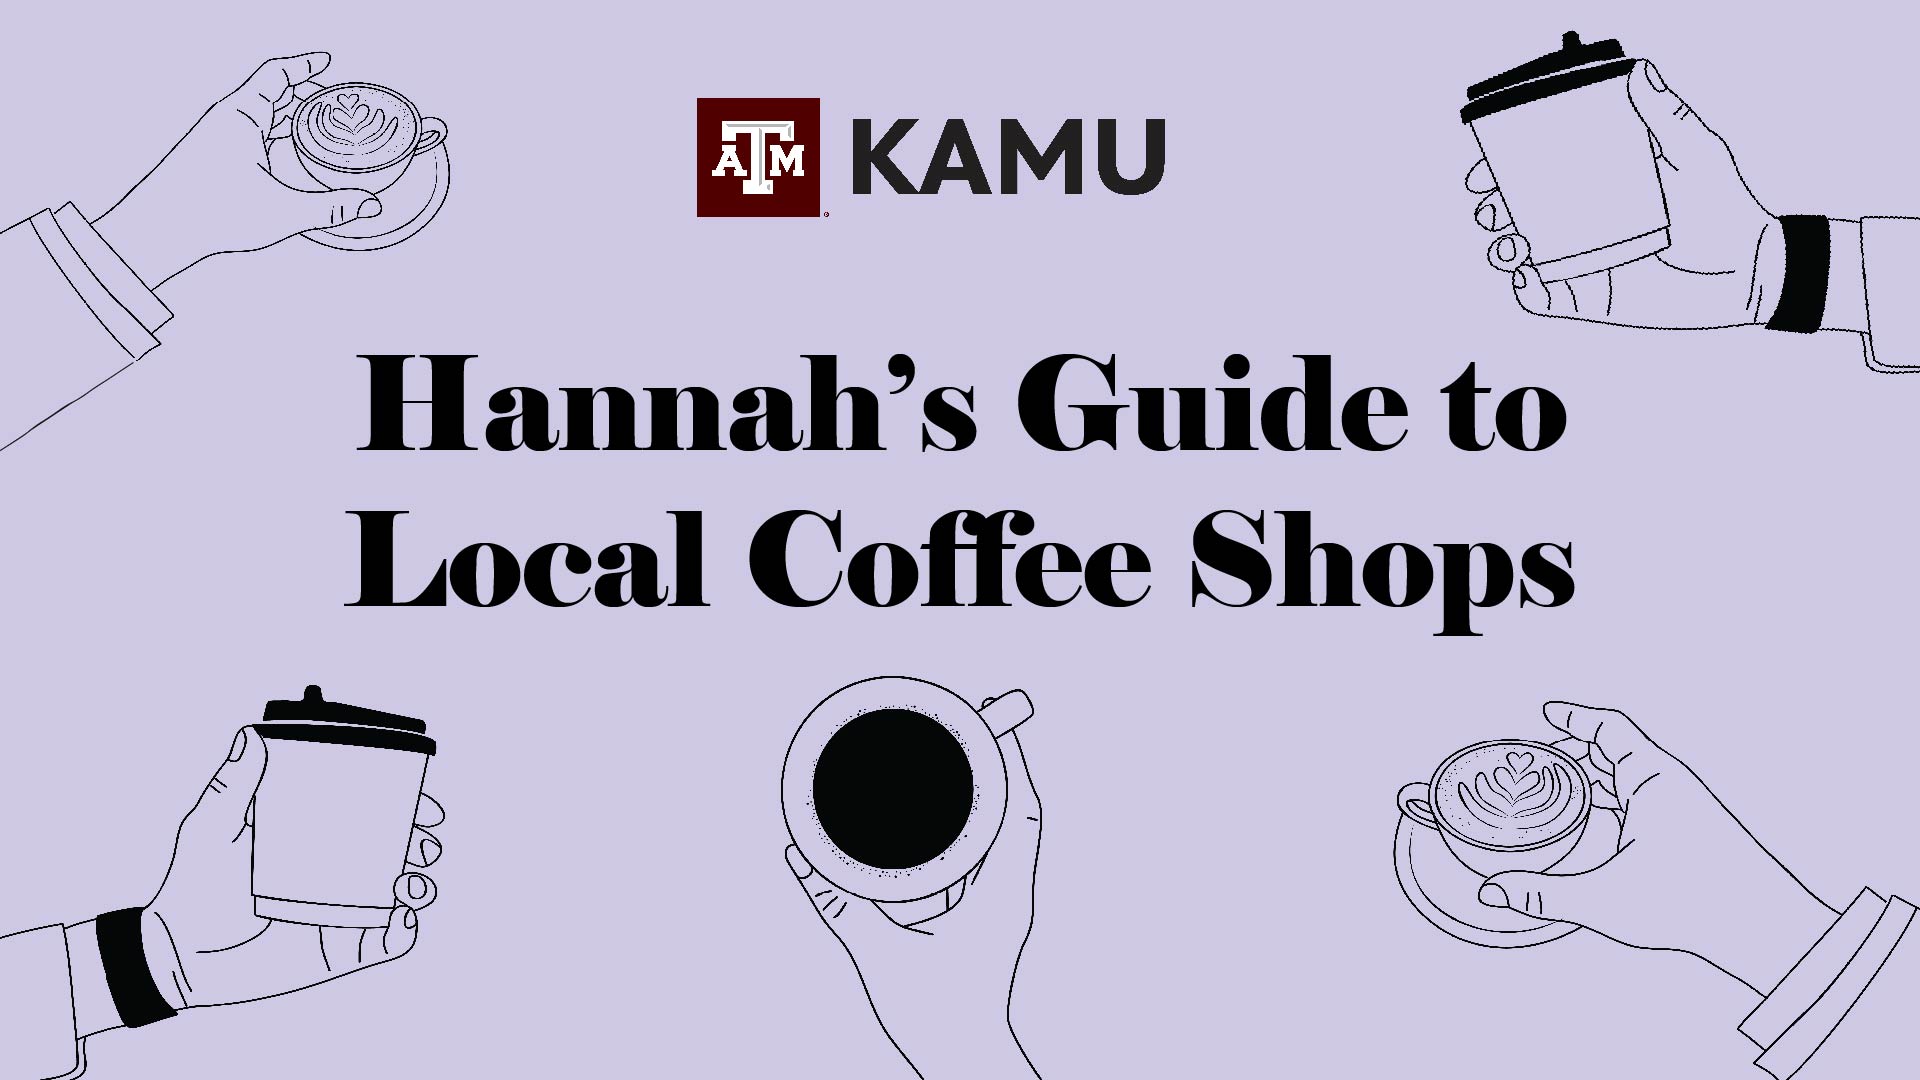 Hannah's Guide to Local Coffee Shops